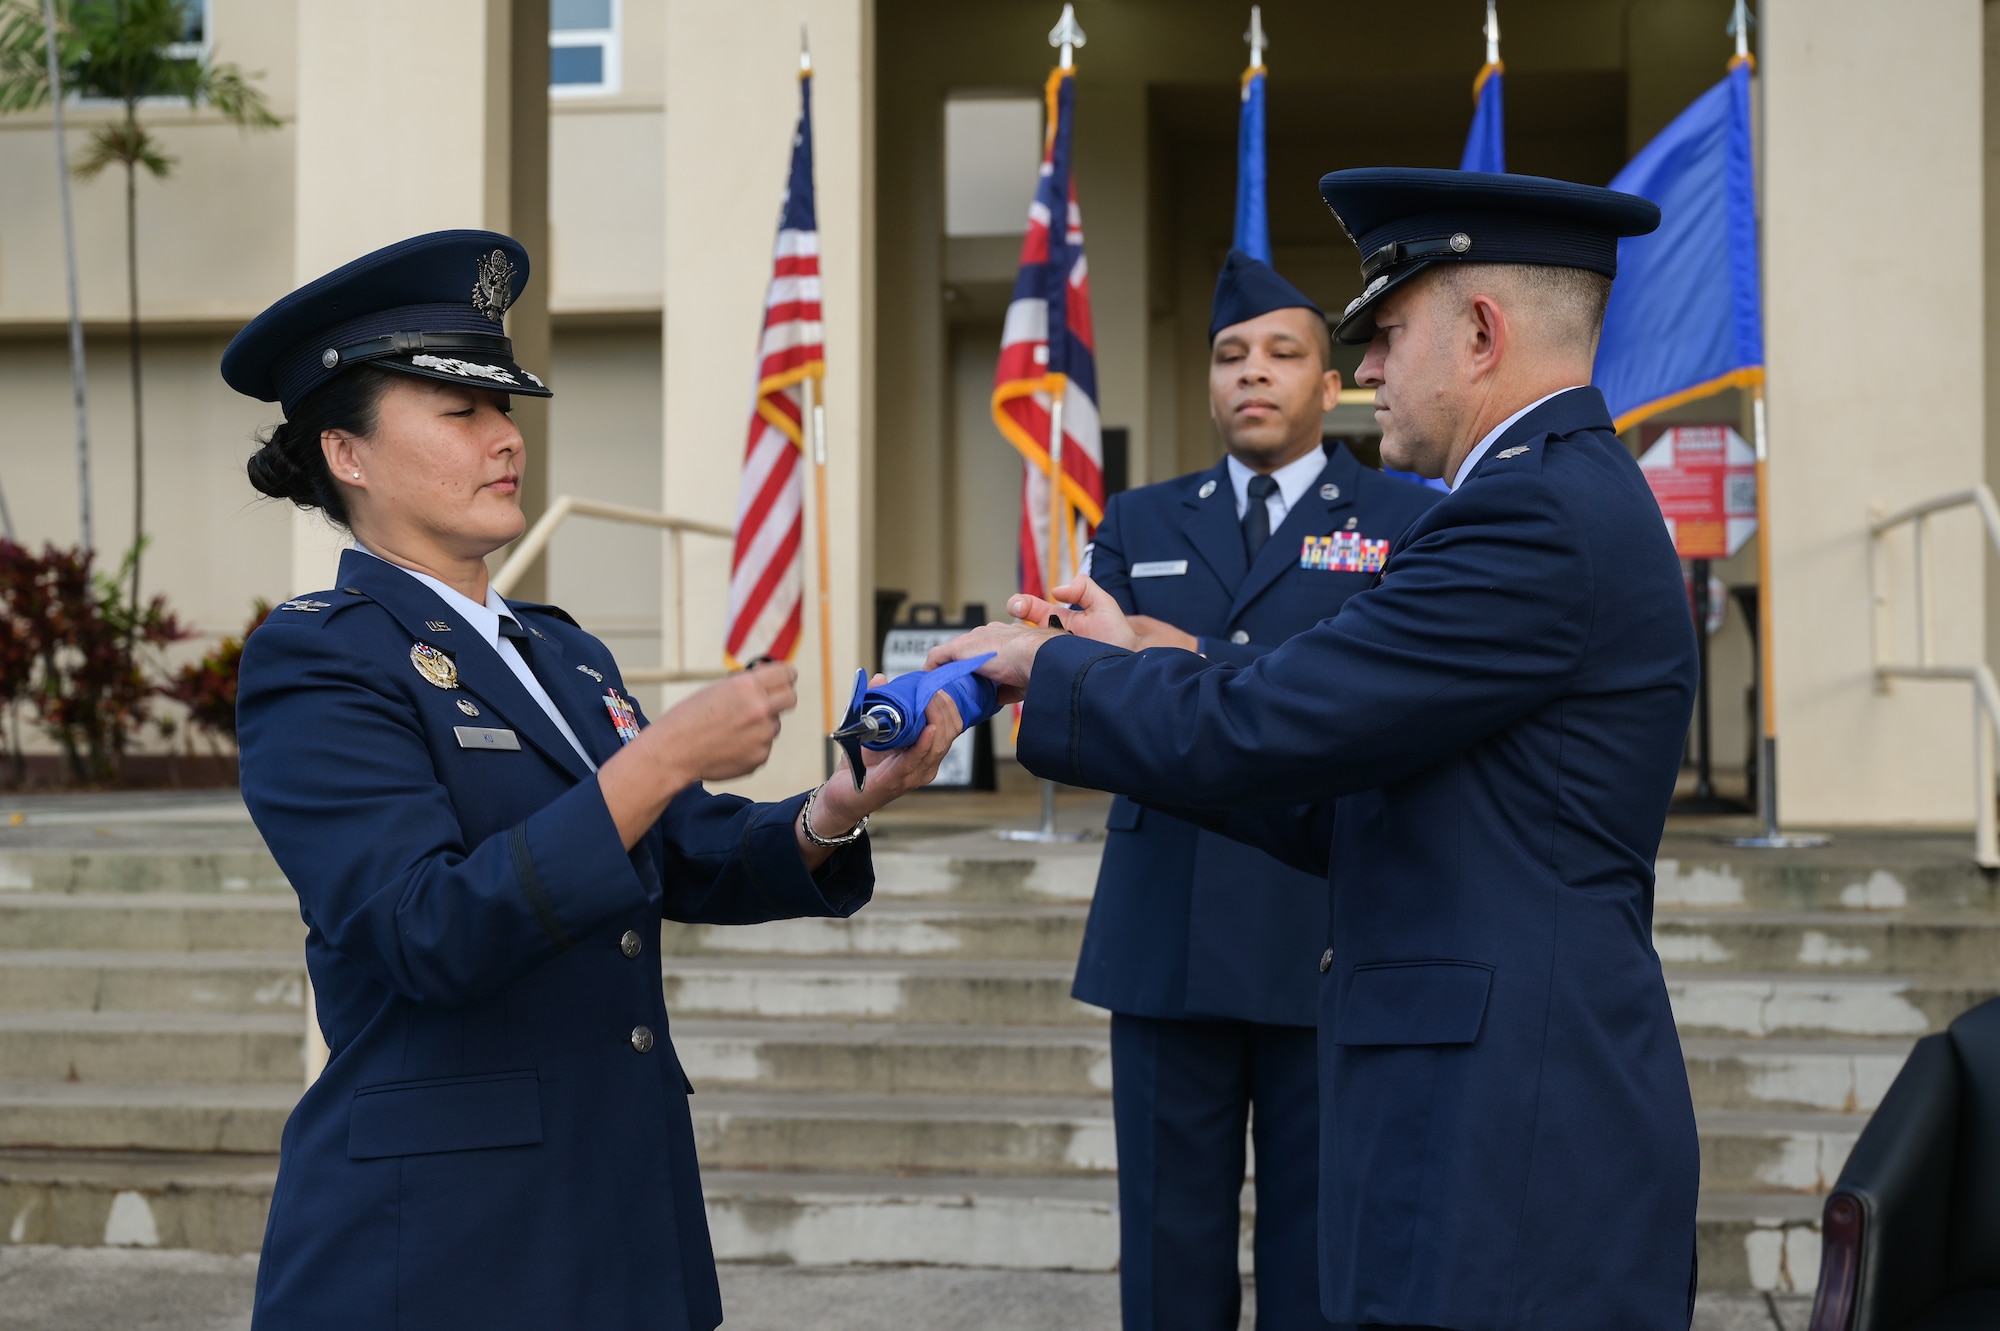 Col. Stephanie Ku, 15th Medical Group commander, and Lt. Col. Joseph Sanchez, 15th Healthcare Operations Squadron incoming commander, furl the 15th Medical Support Squadron guidon during a deactivation ceremony at Joint Base Pearl Harbor-Hickam, Hawaii, July 21, 2022. The 15th HCOS is one of the three squadrons that are a part of the 15th MDG. (U.S. Air Force photo by Staff Sgt. Alan Ricker)